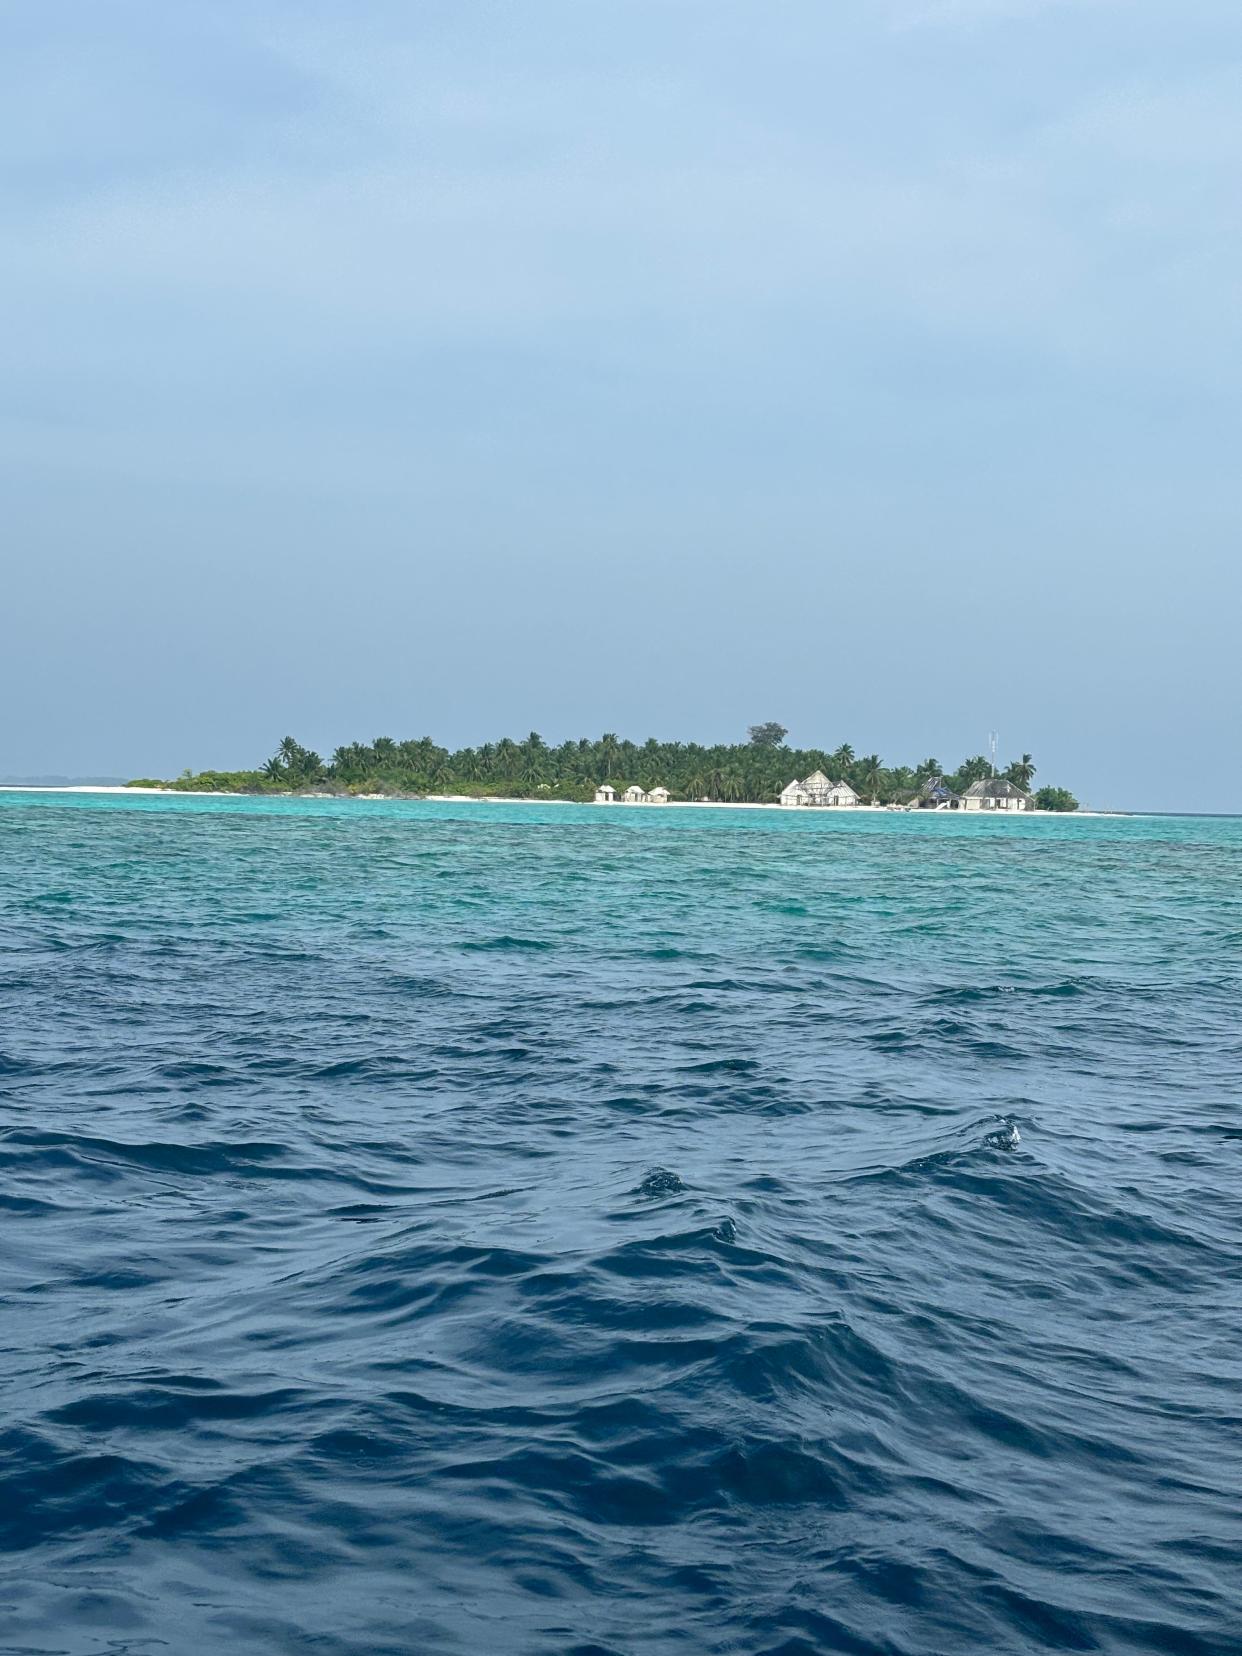 Less than 200 islands are uninhabited.